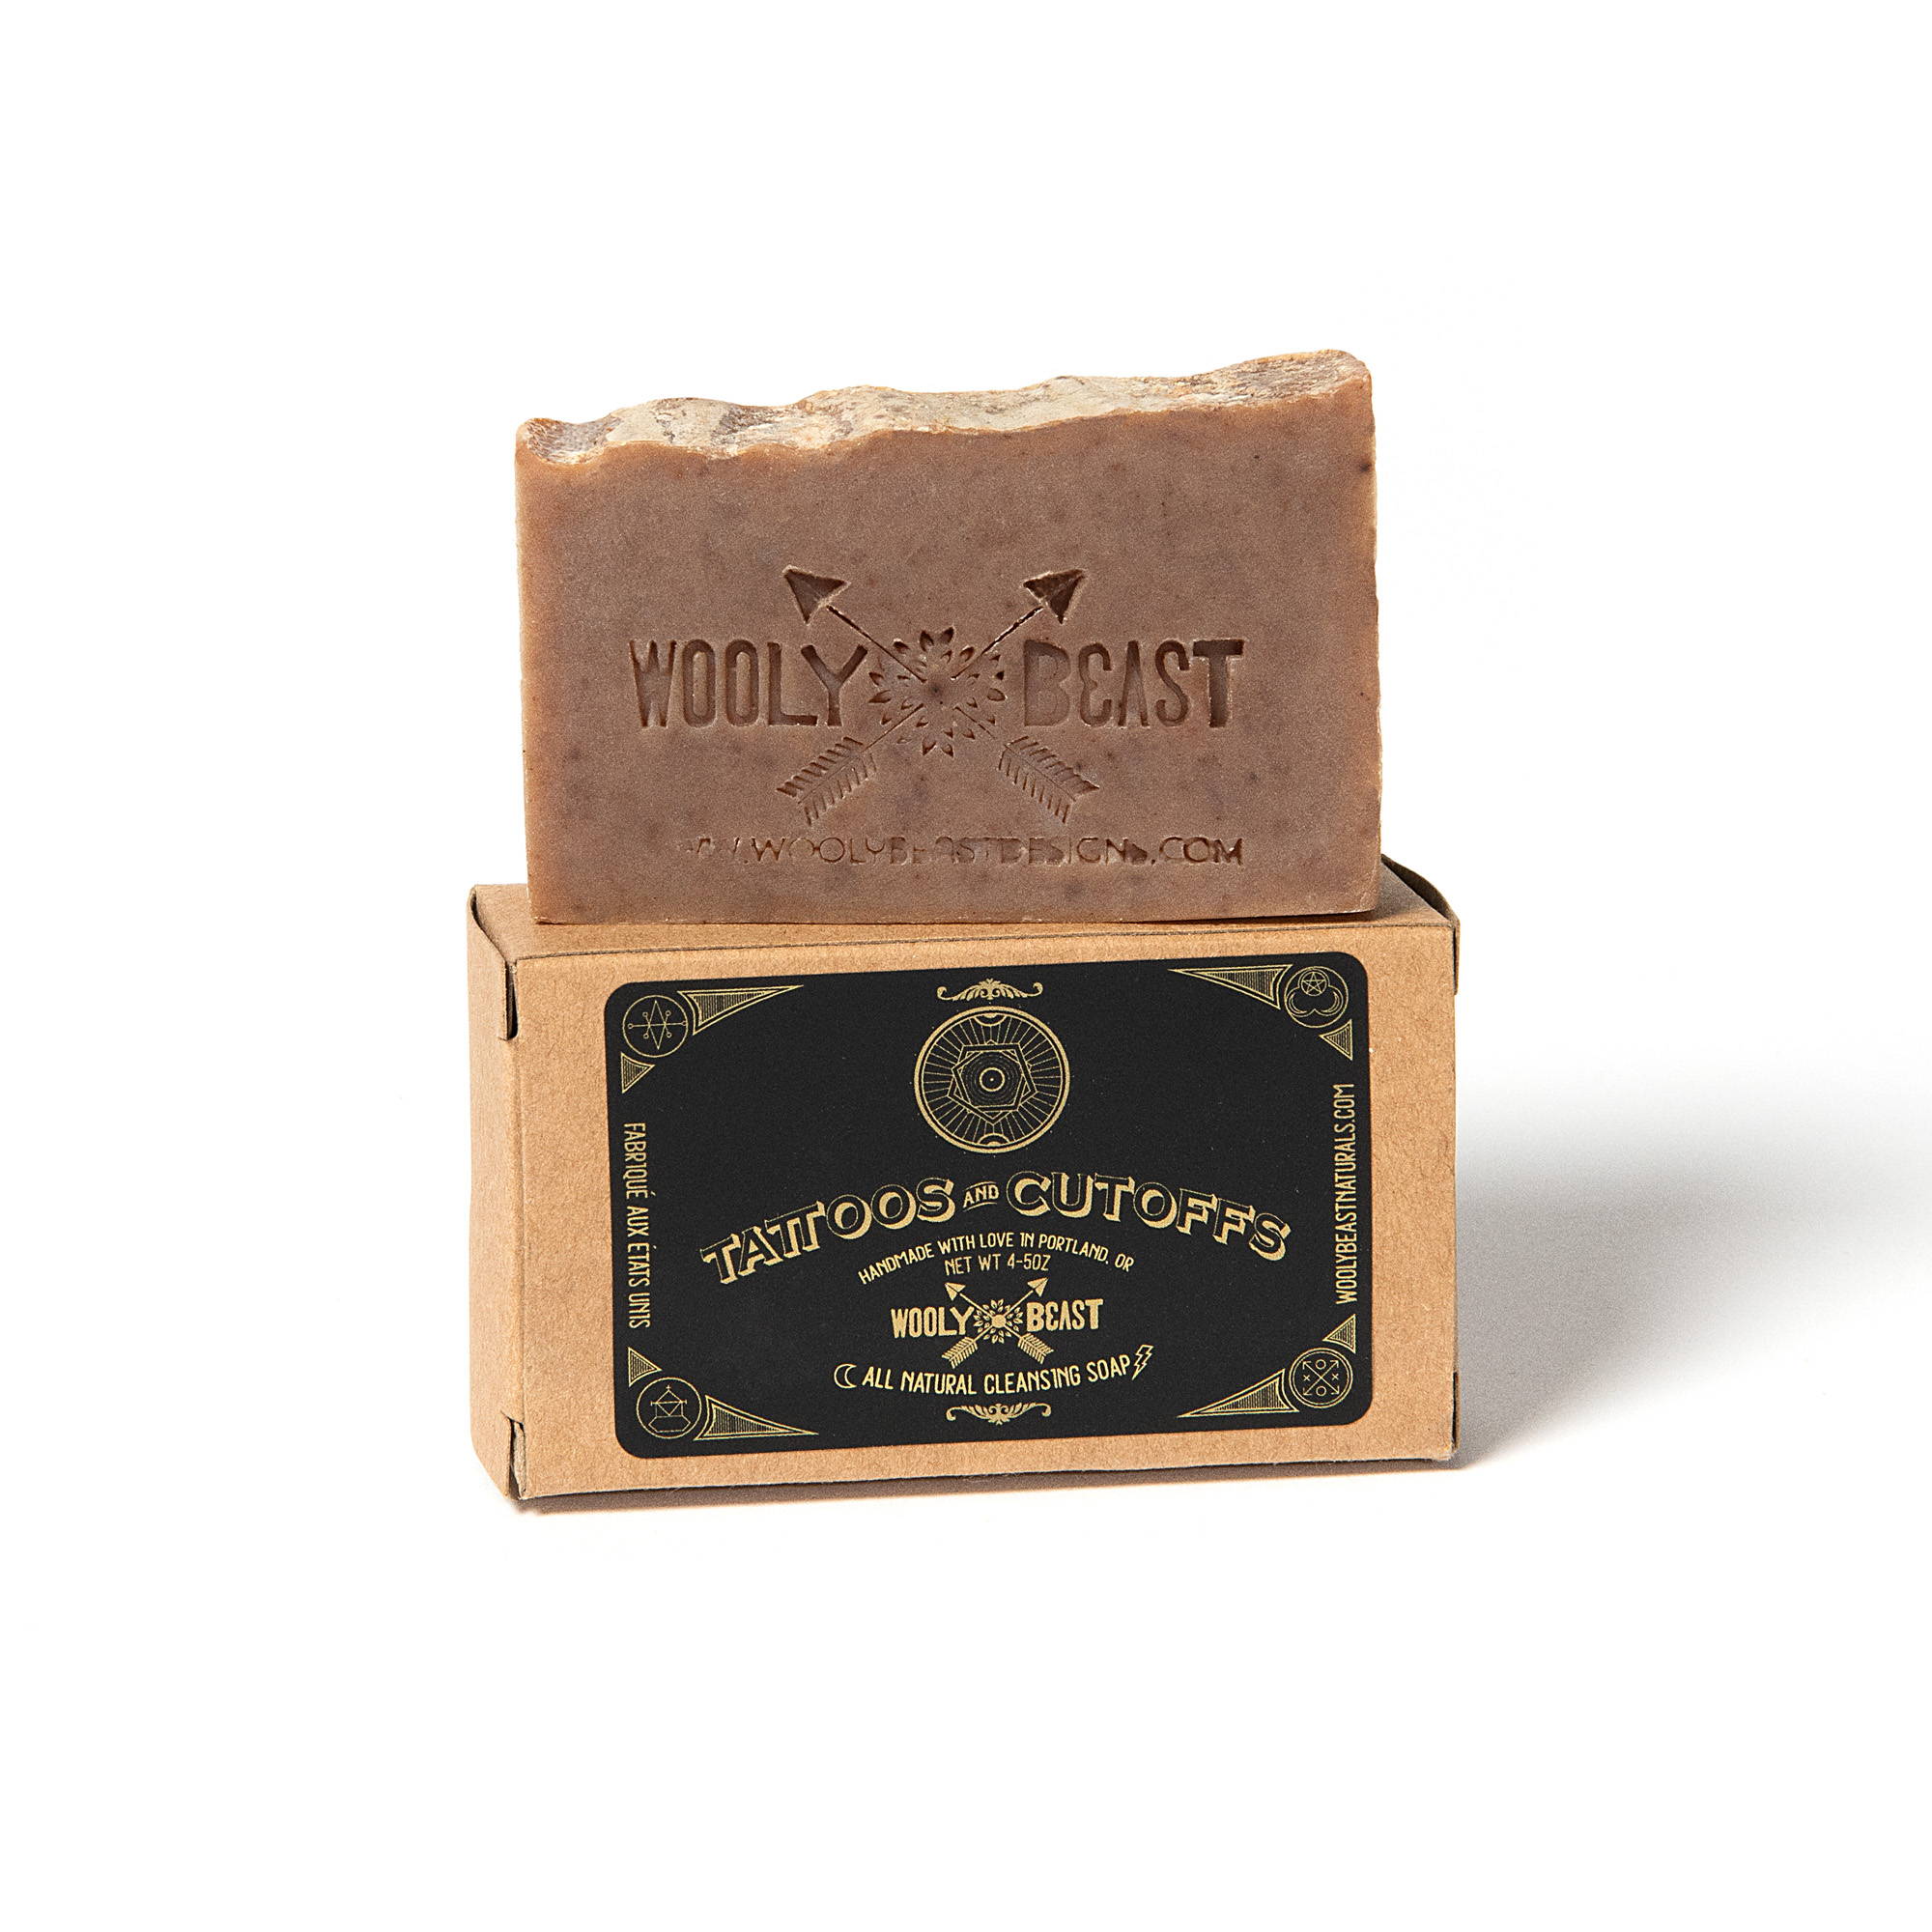 Tattoos and Cutoffs Cold Process Soap by Wooly Beast on Kraft Paper box packaging on white background